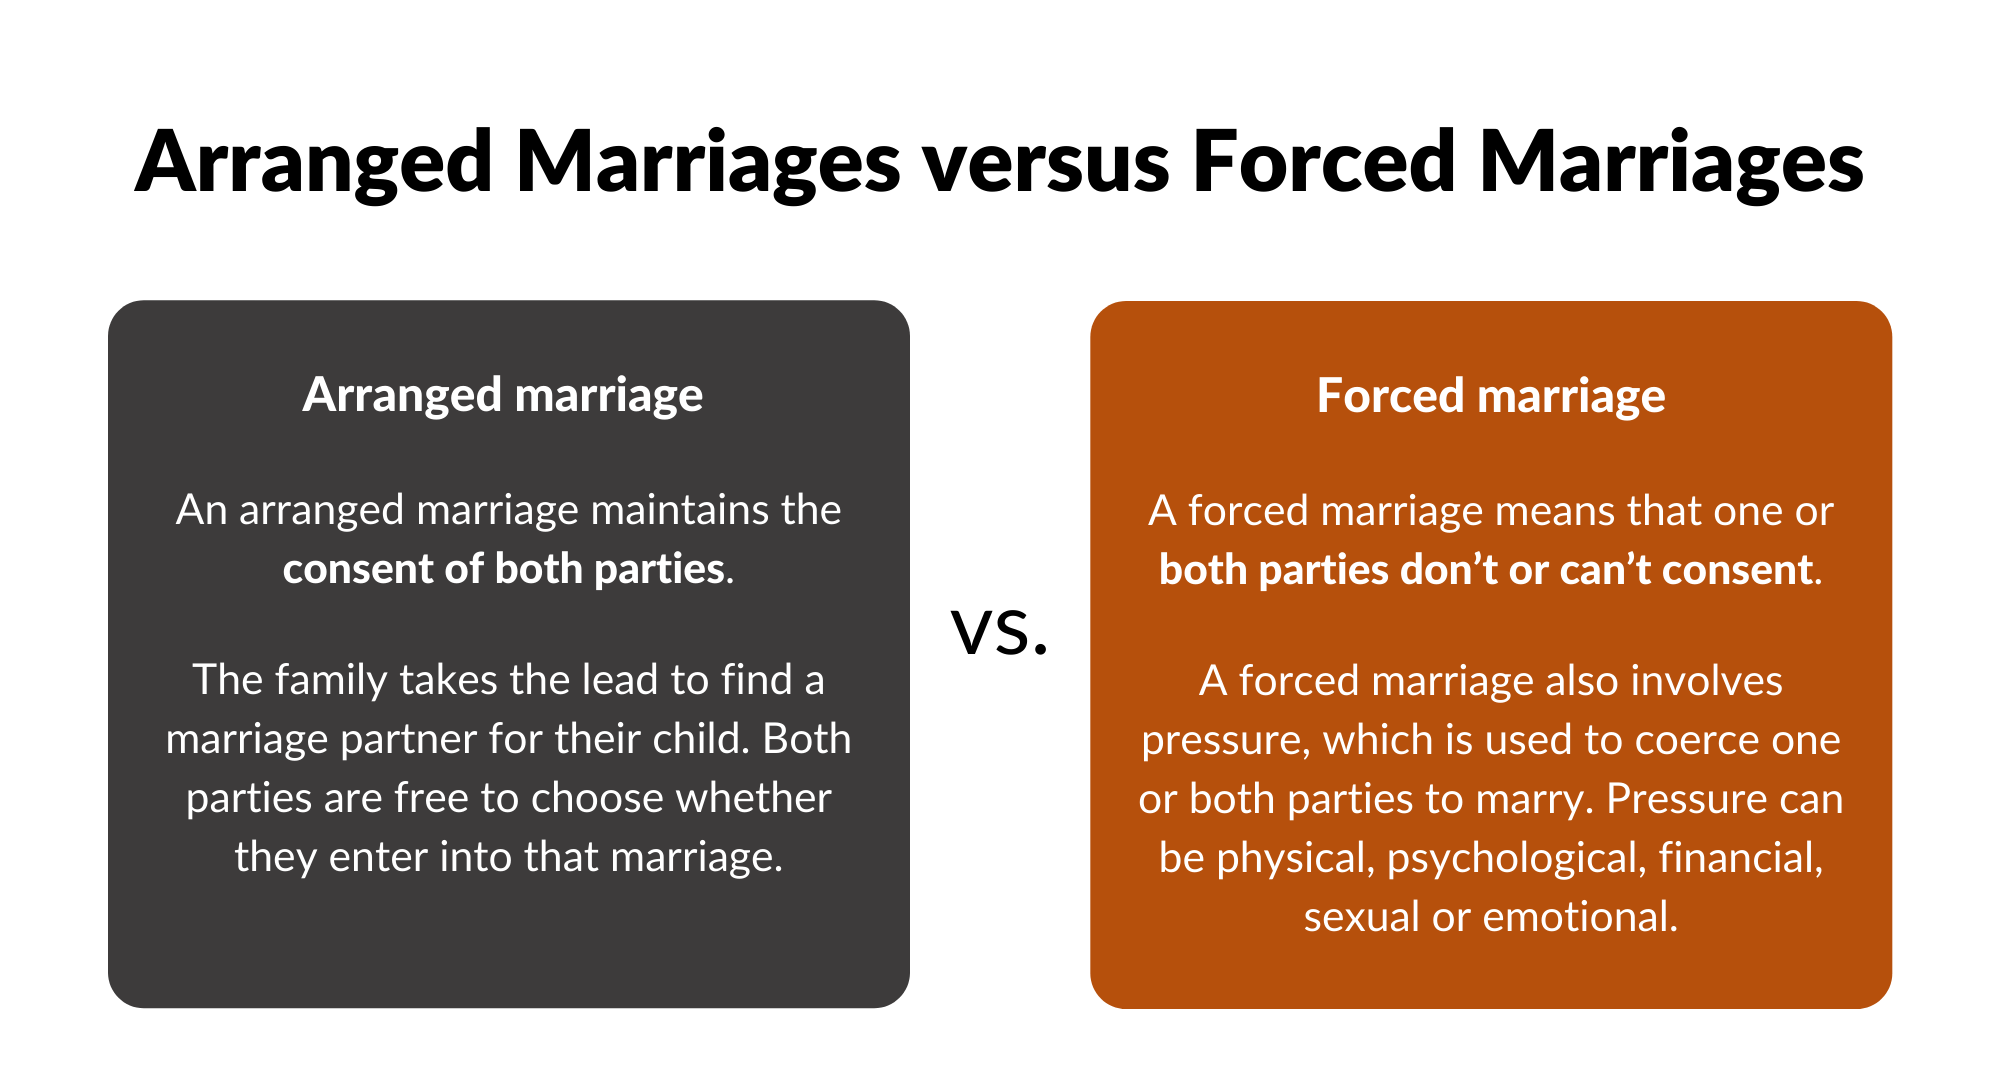 short essay on forced marriage